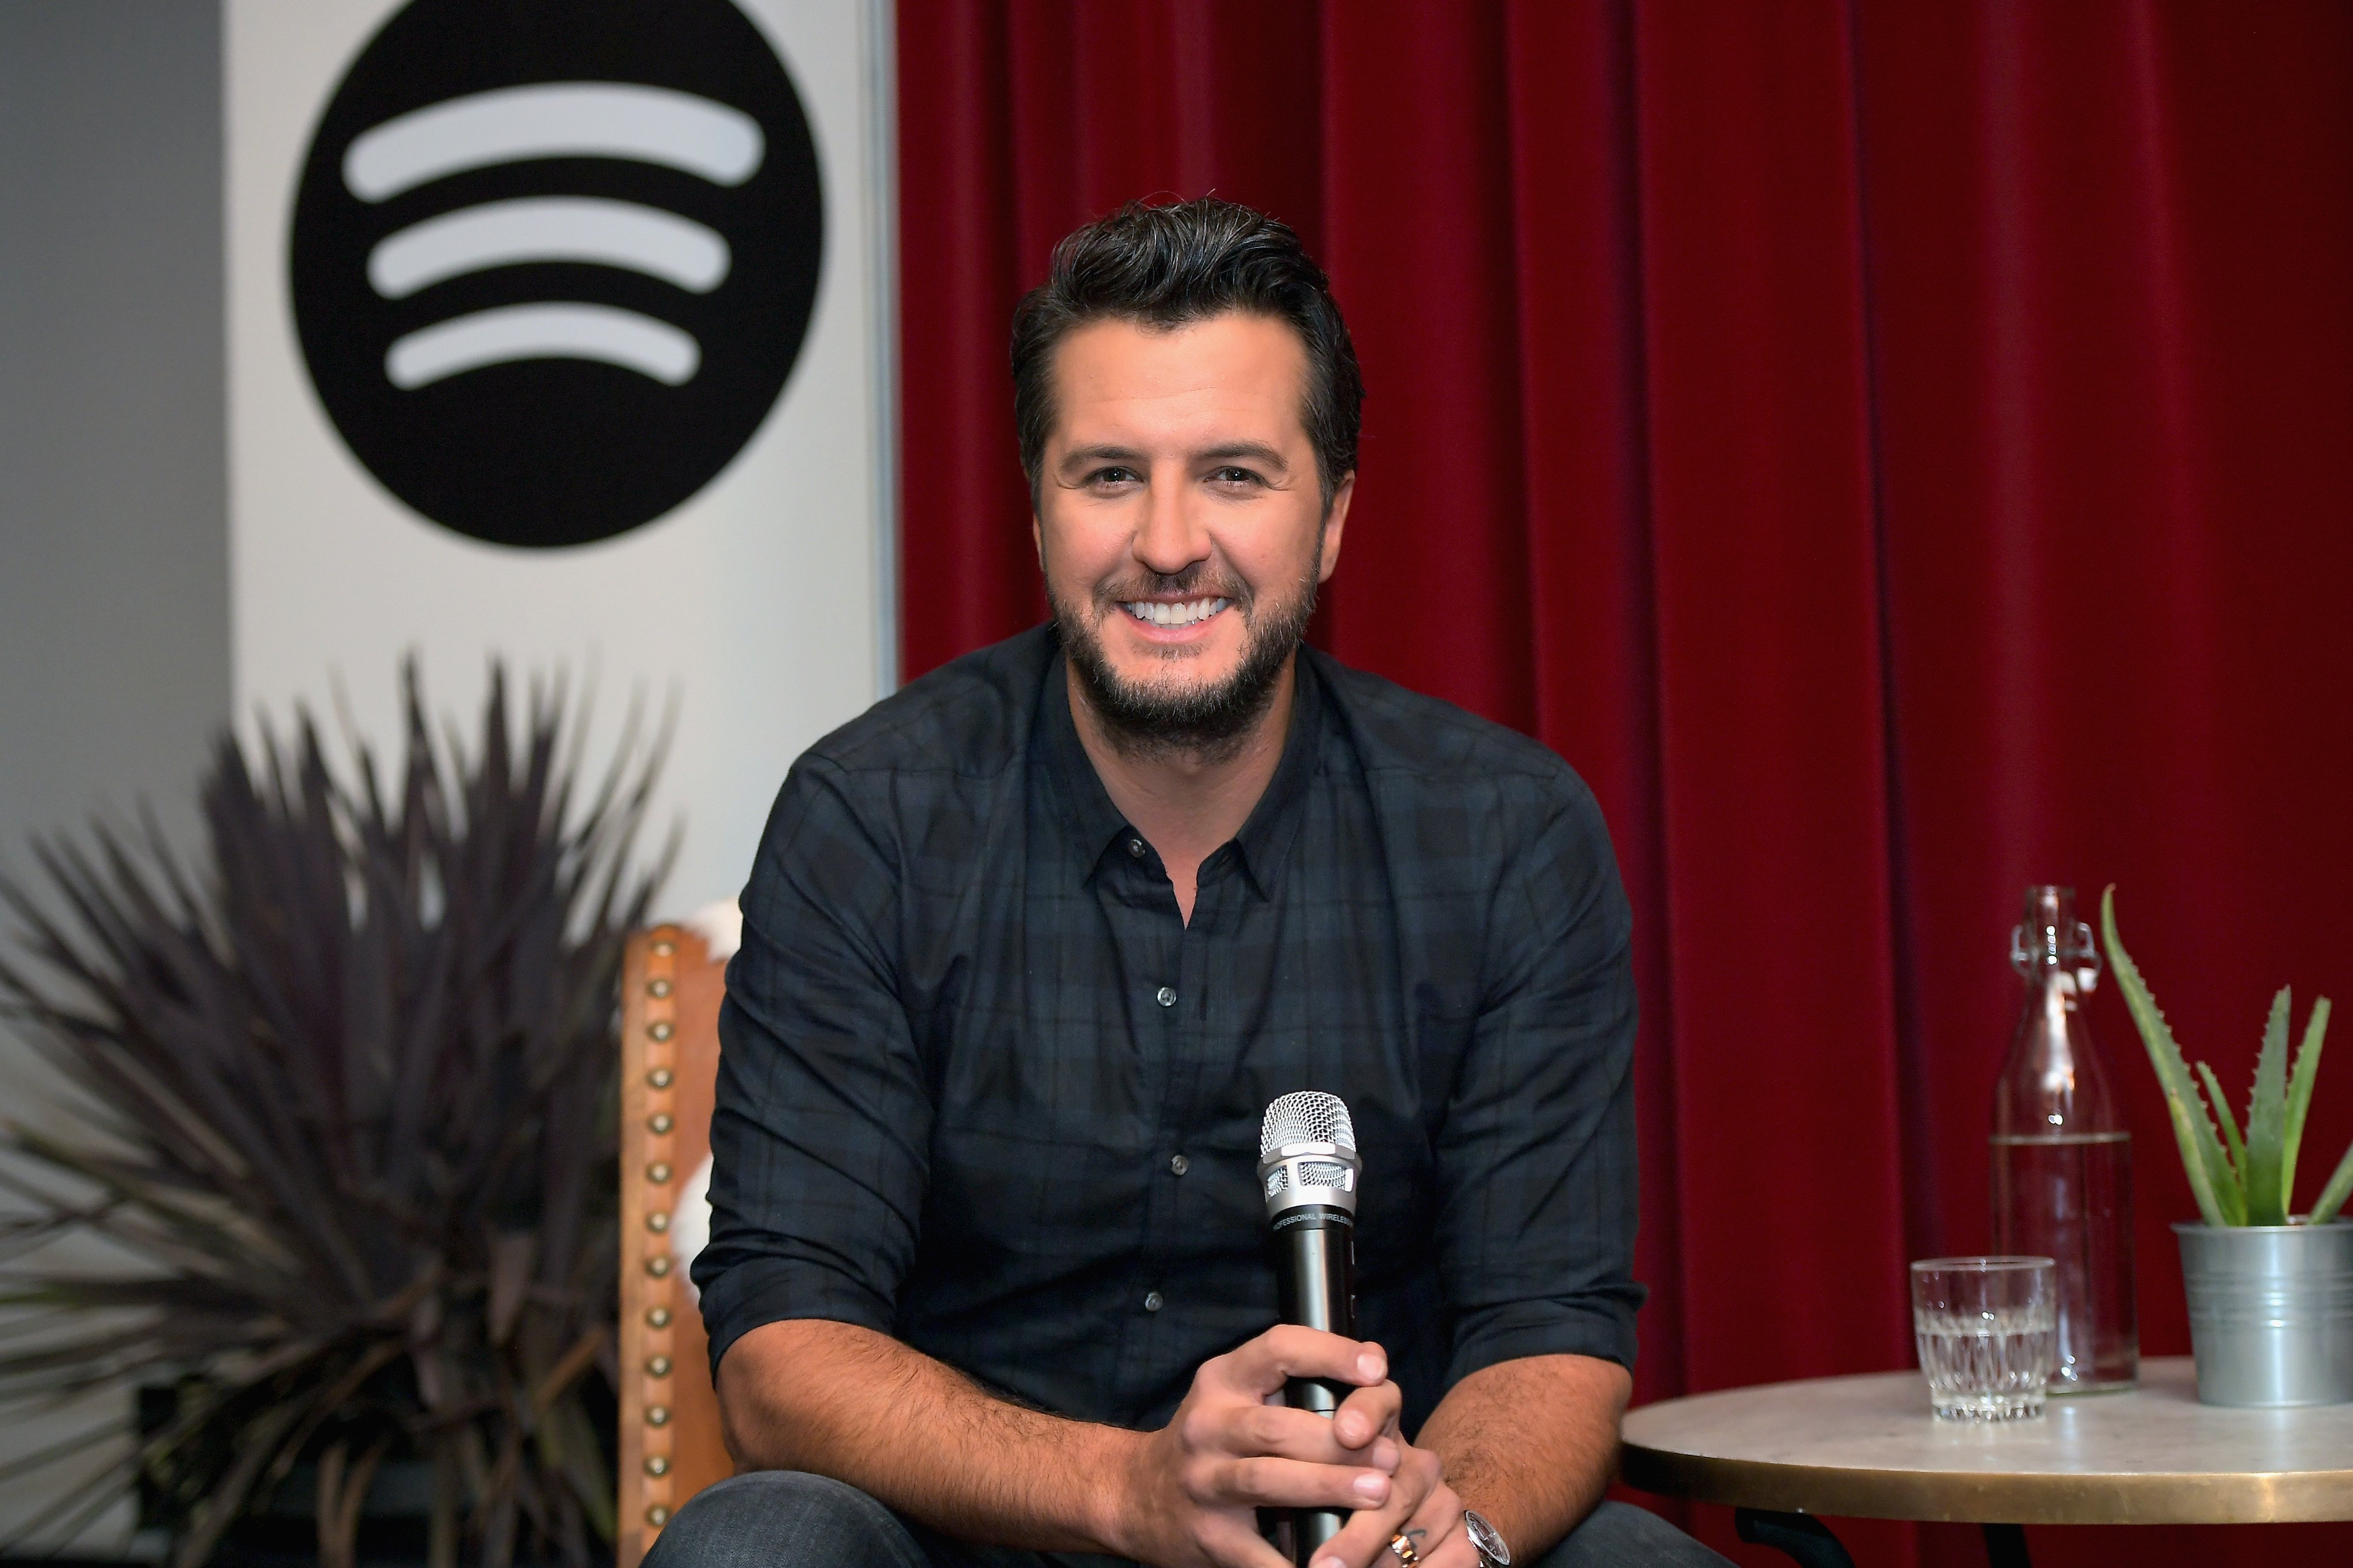 Luke Bryan during a 2017 fan meet and greet event in Los Angeles. | Photo: Getty Images